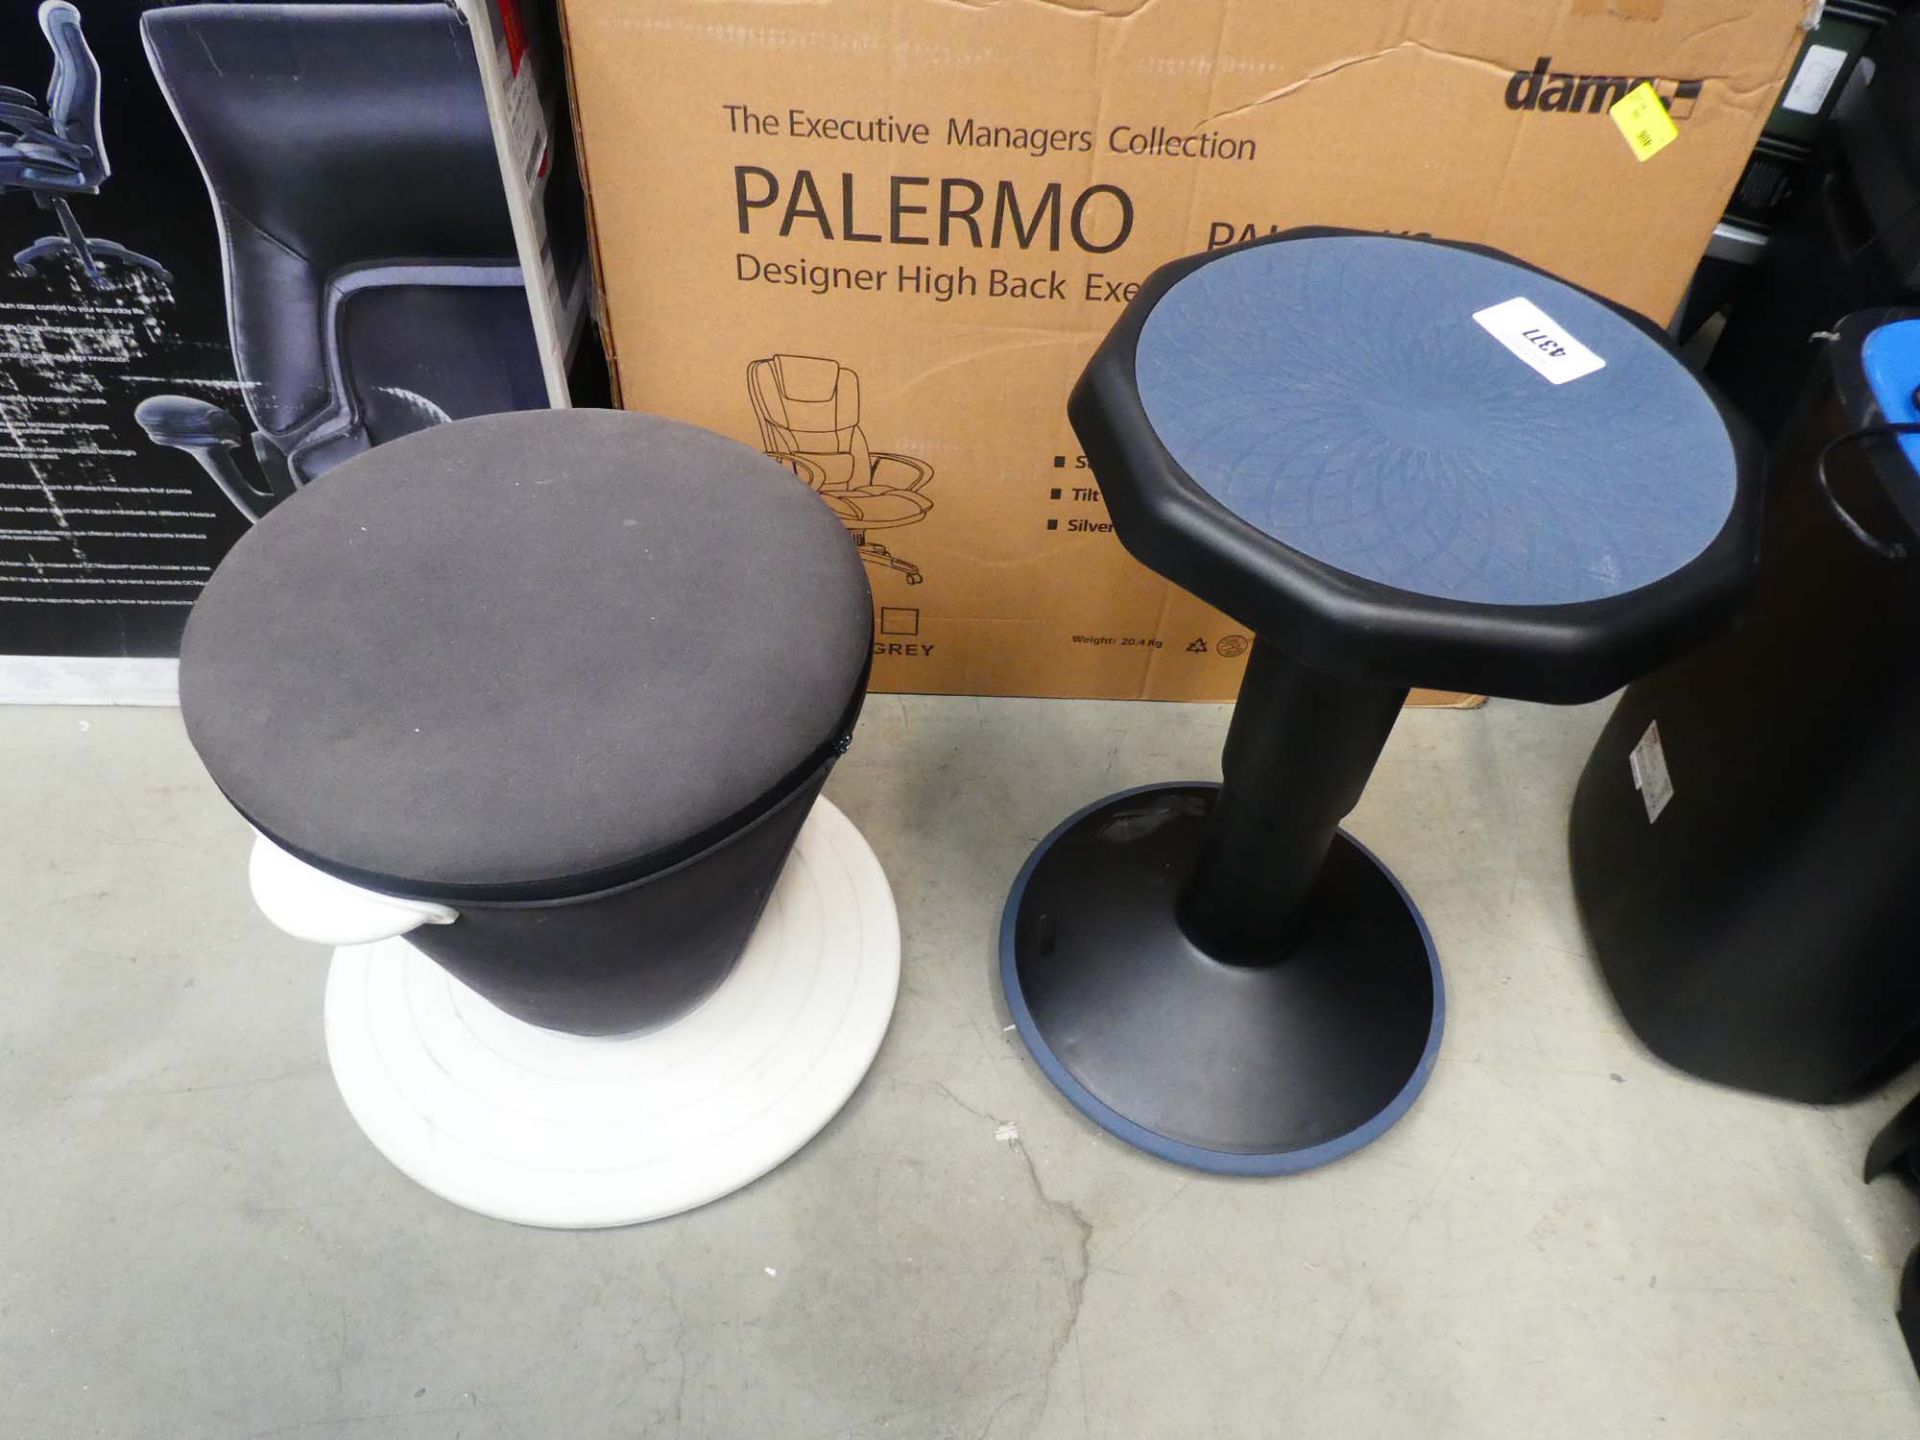 Wobble stool and one other